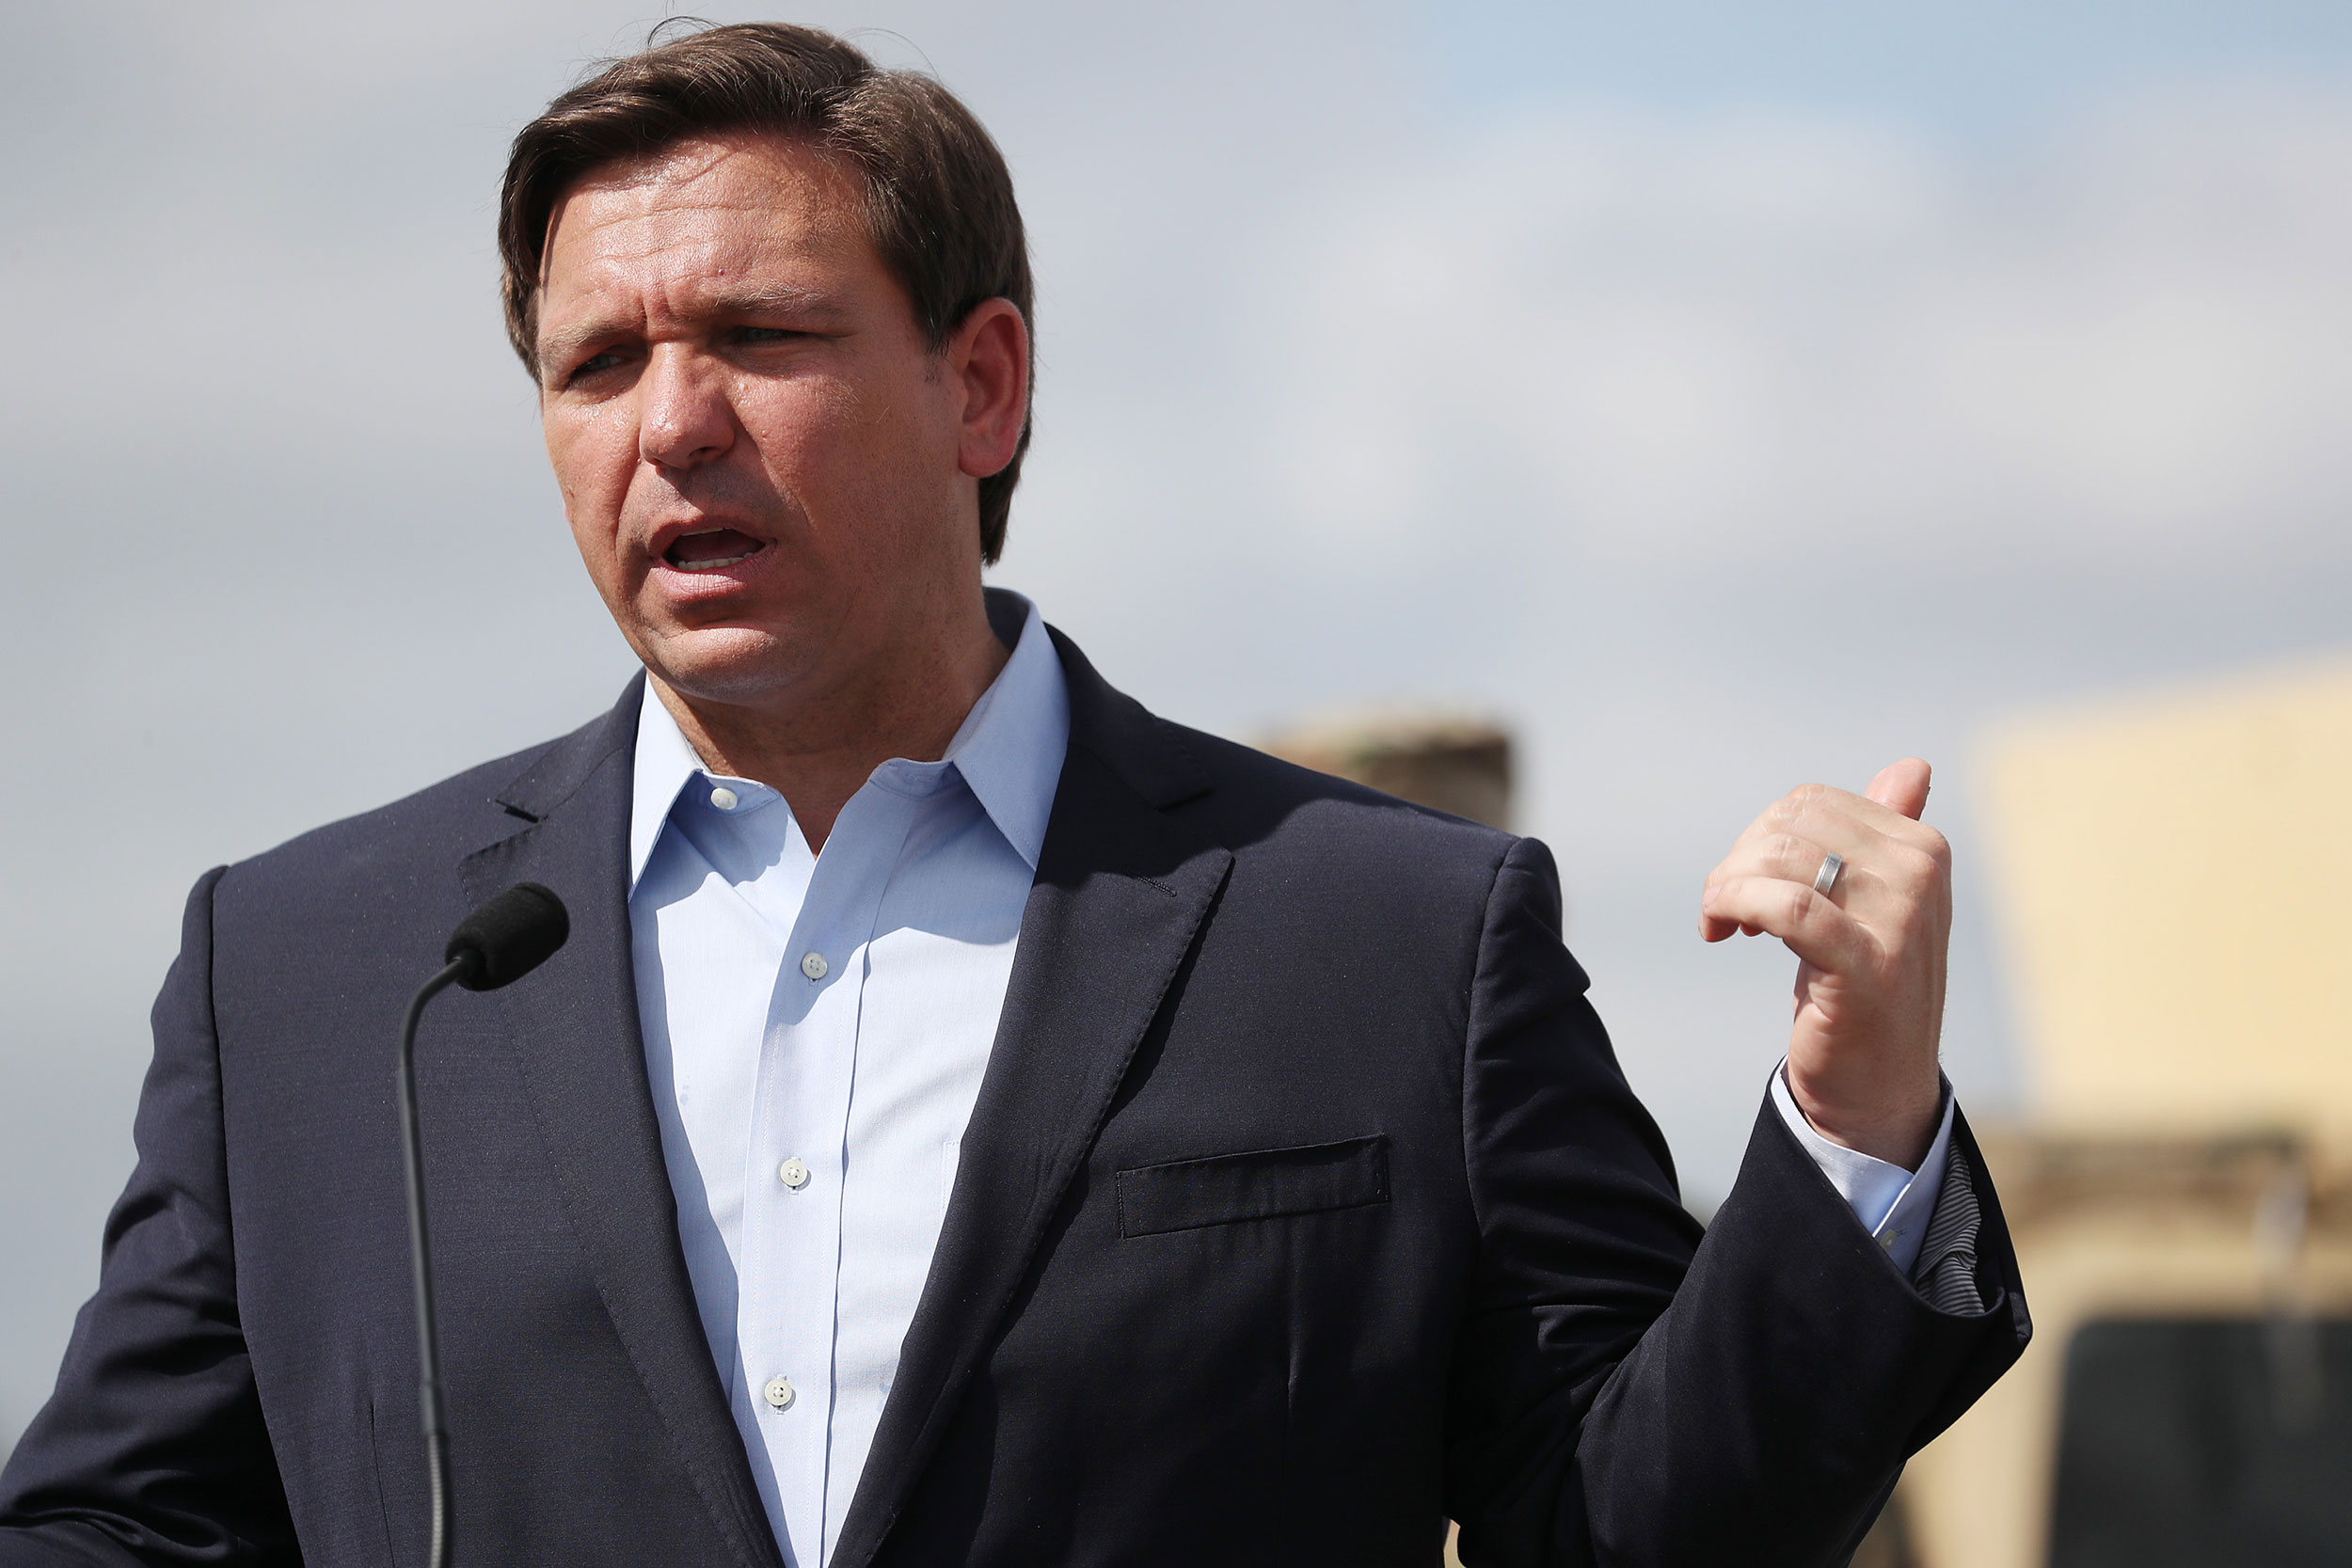 Florida Gov. Ron DeSantis speaks during a news conference in Miami Gardens, Florida, on March 30.